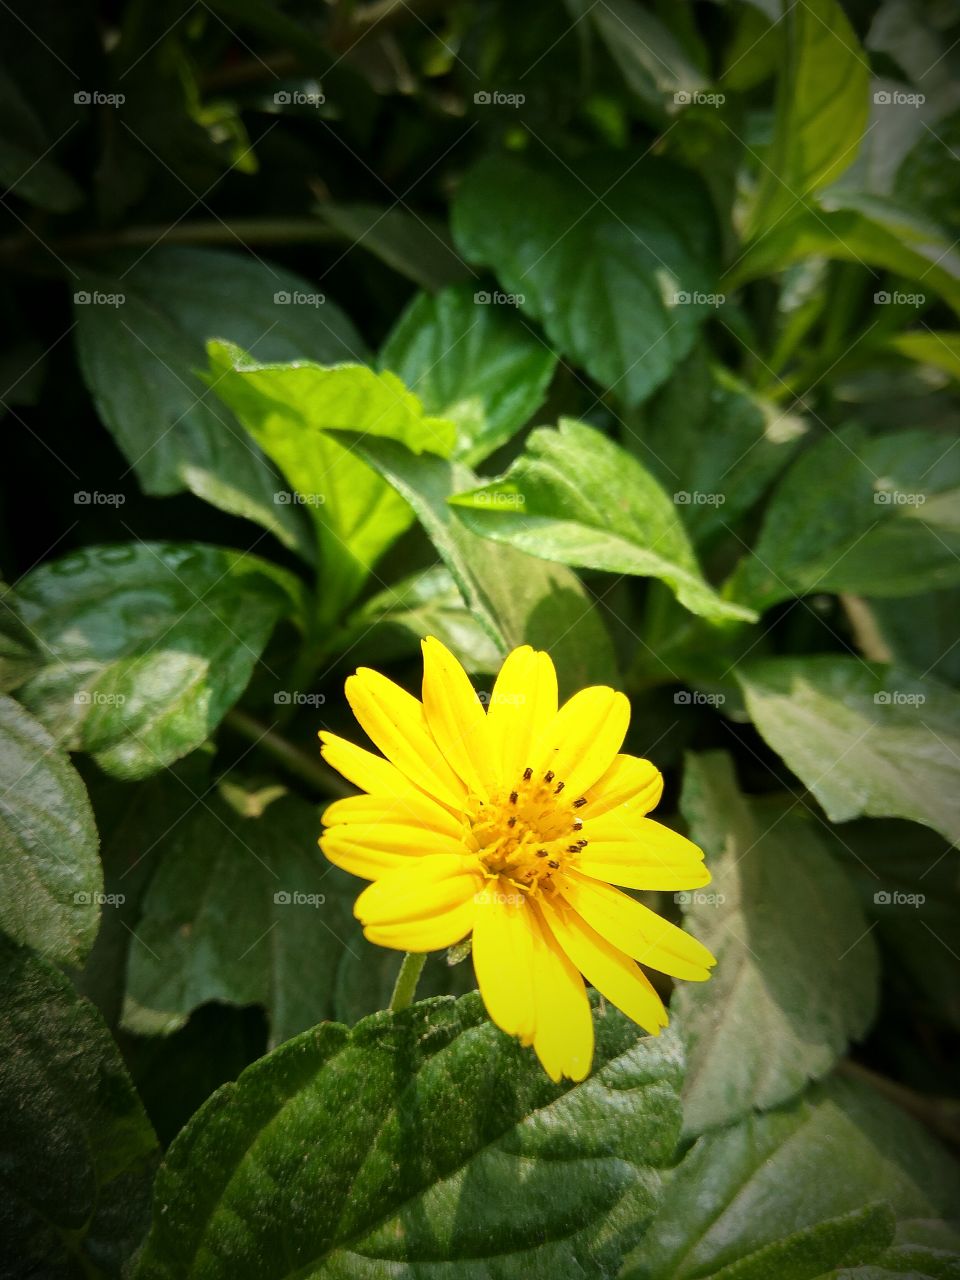 lovely yellow flower and dark green leafs